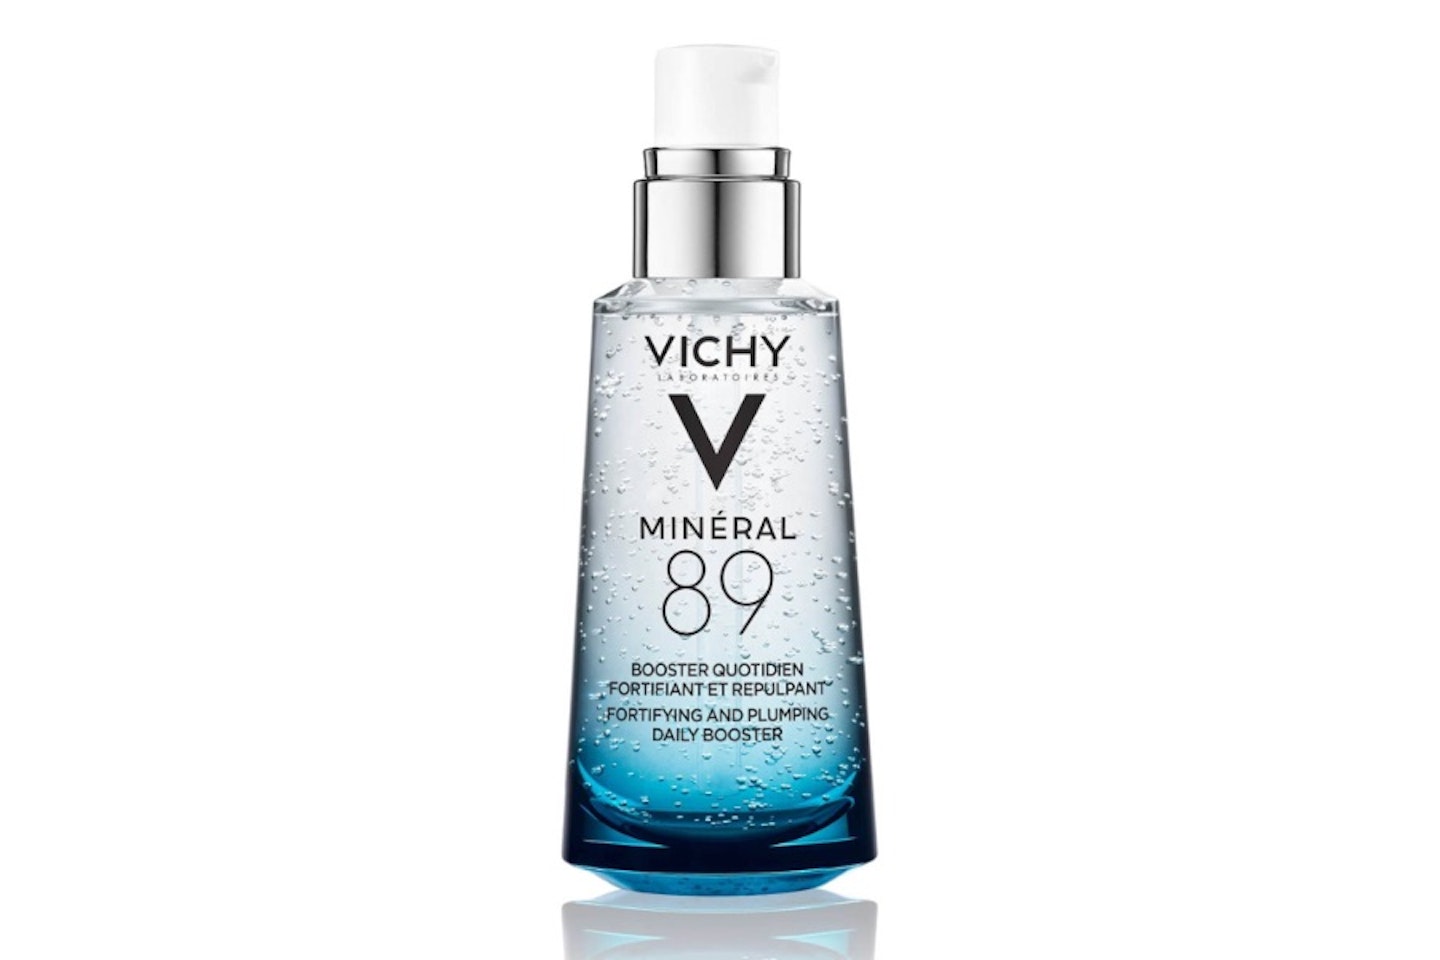 VICHY Minu00e9ral 89 Hyaluronic Acid Hydration Booster 50ml